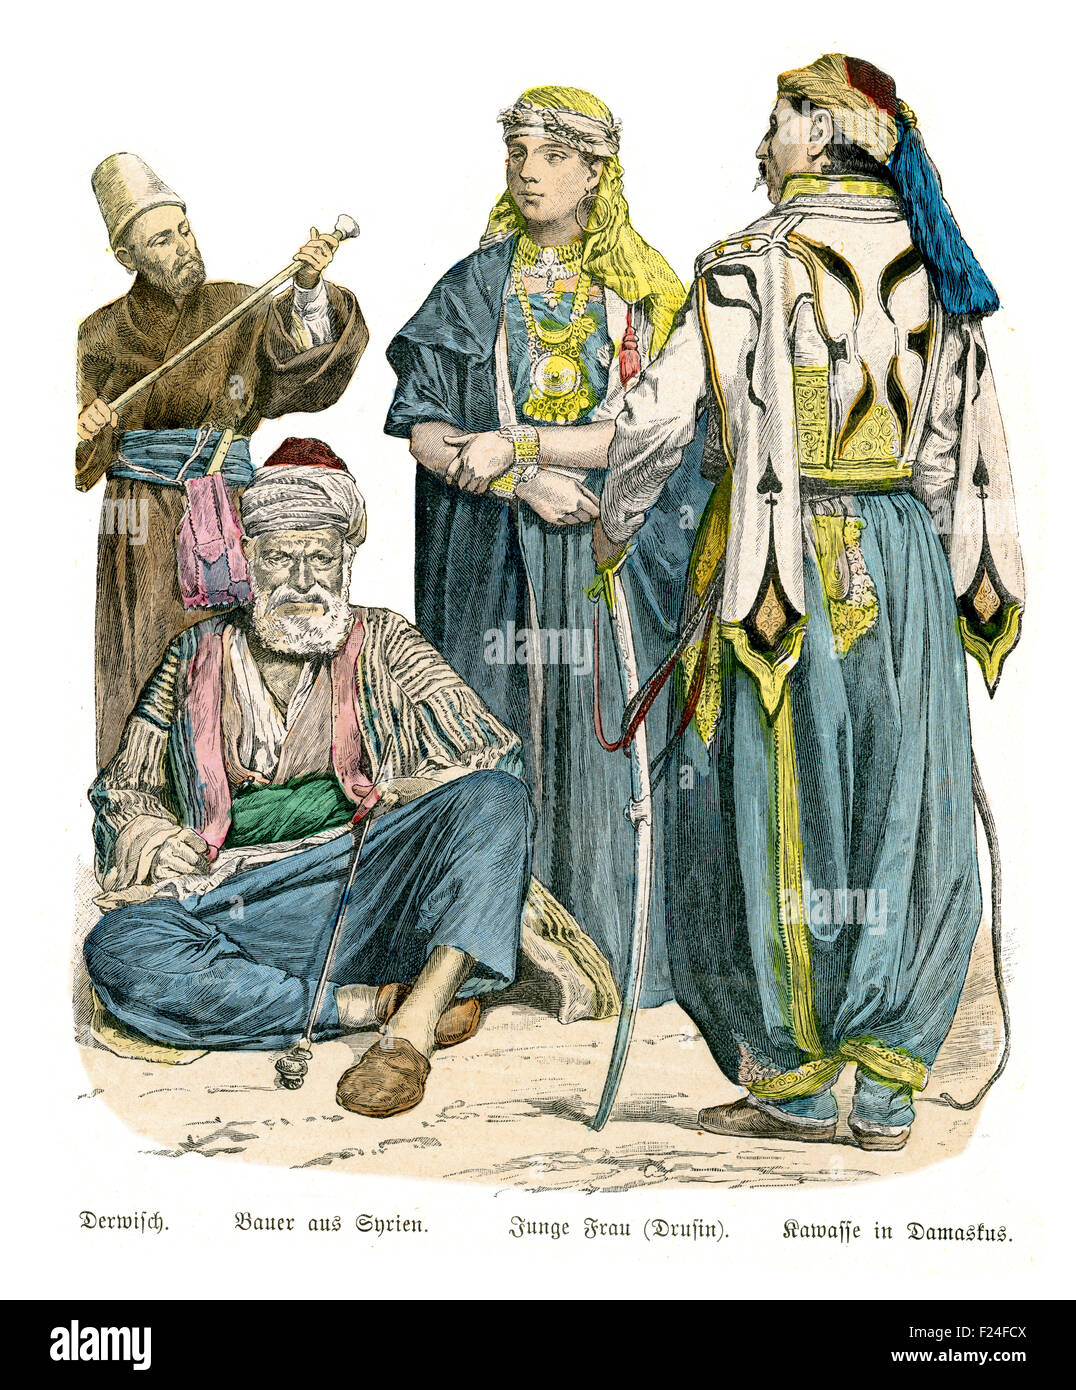 Period costumes of Ottoman Empire 19th Century, Dervish, Peasant of Syria, Young Druze woman, Kawasse (policeman) of Damascus. Stock Photo